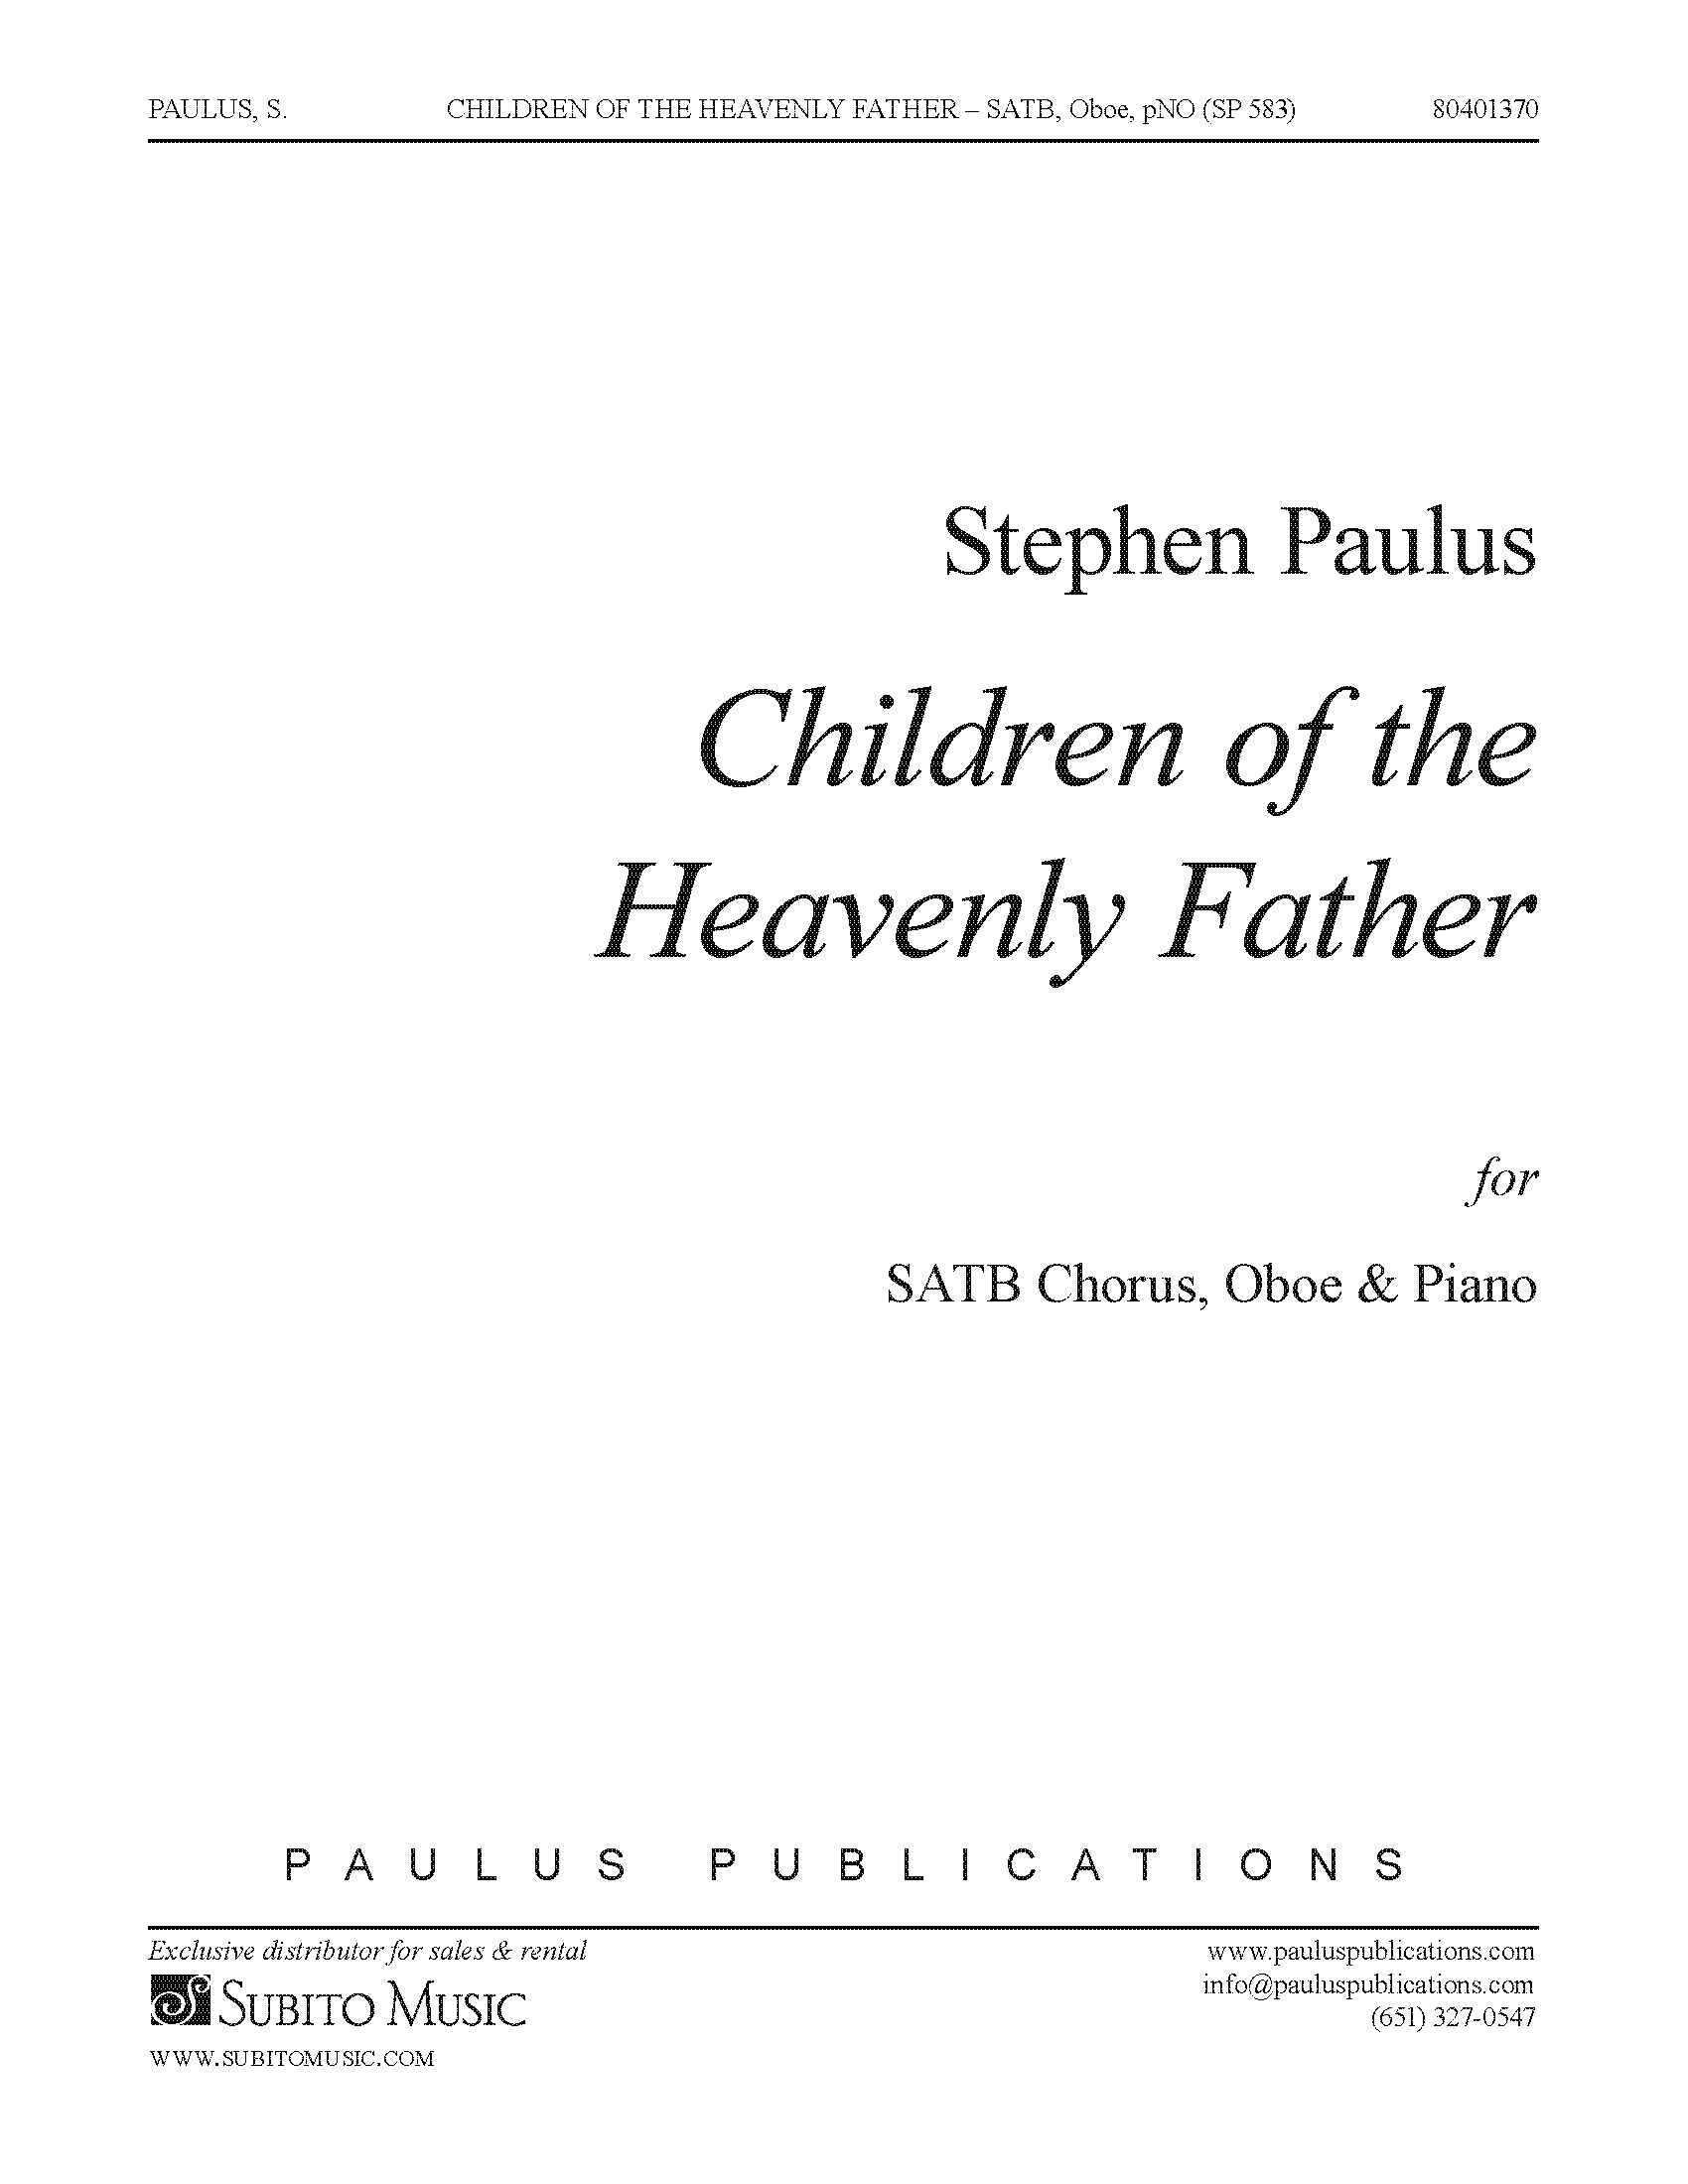 Children of the Heavenly Father for SATB Chorus, Oboe & Piano